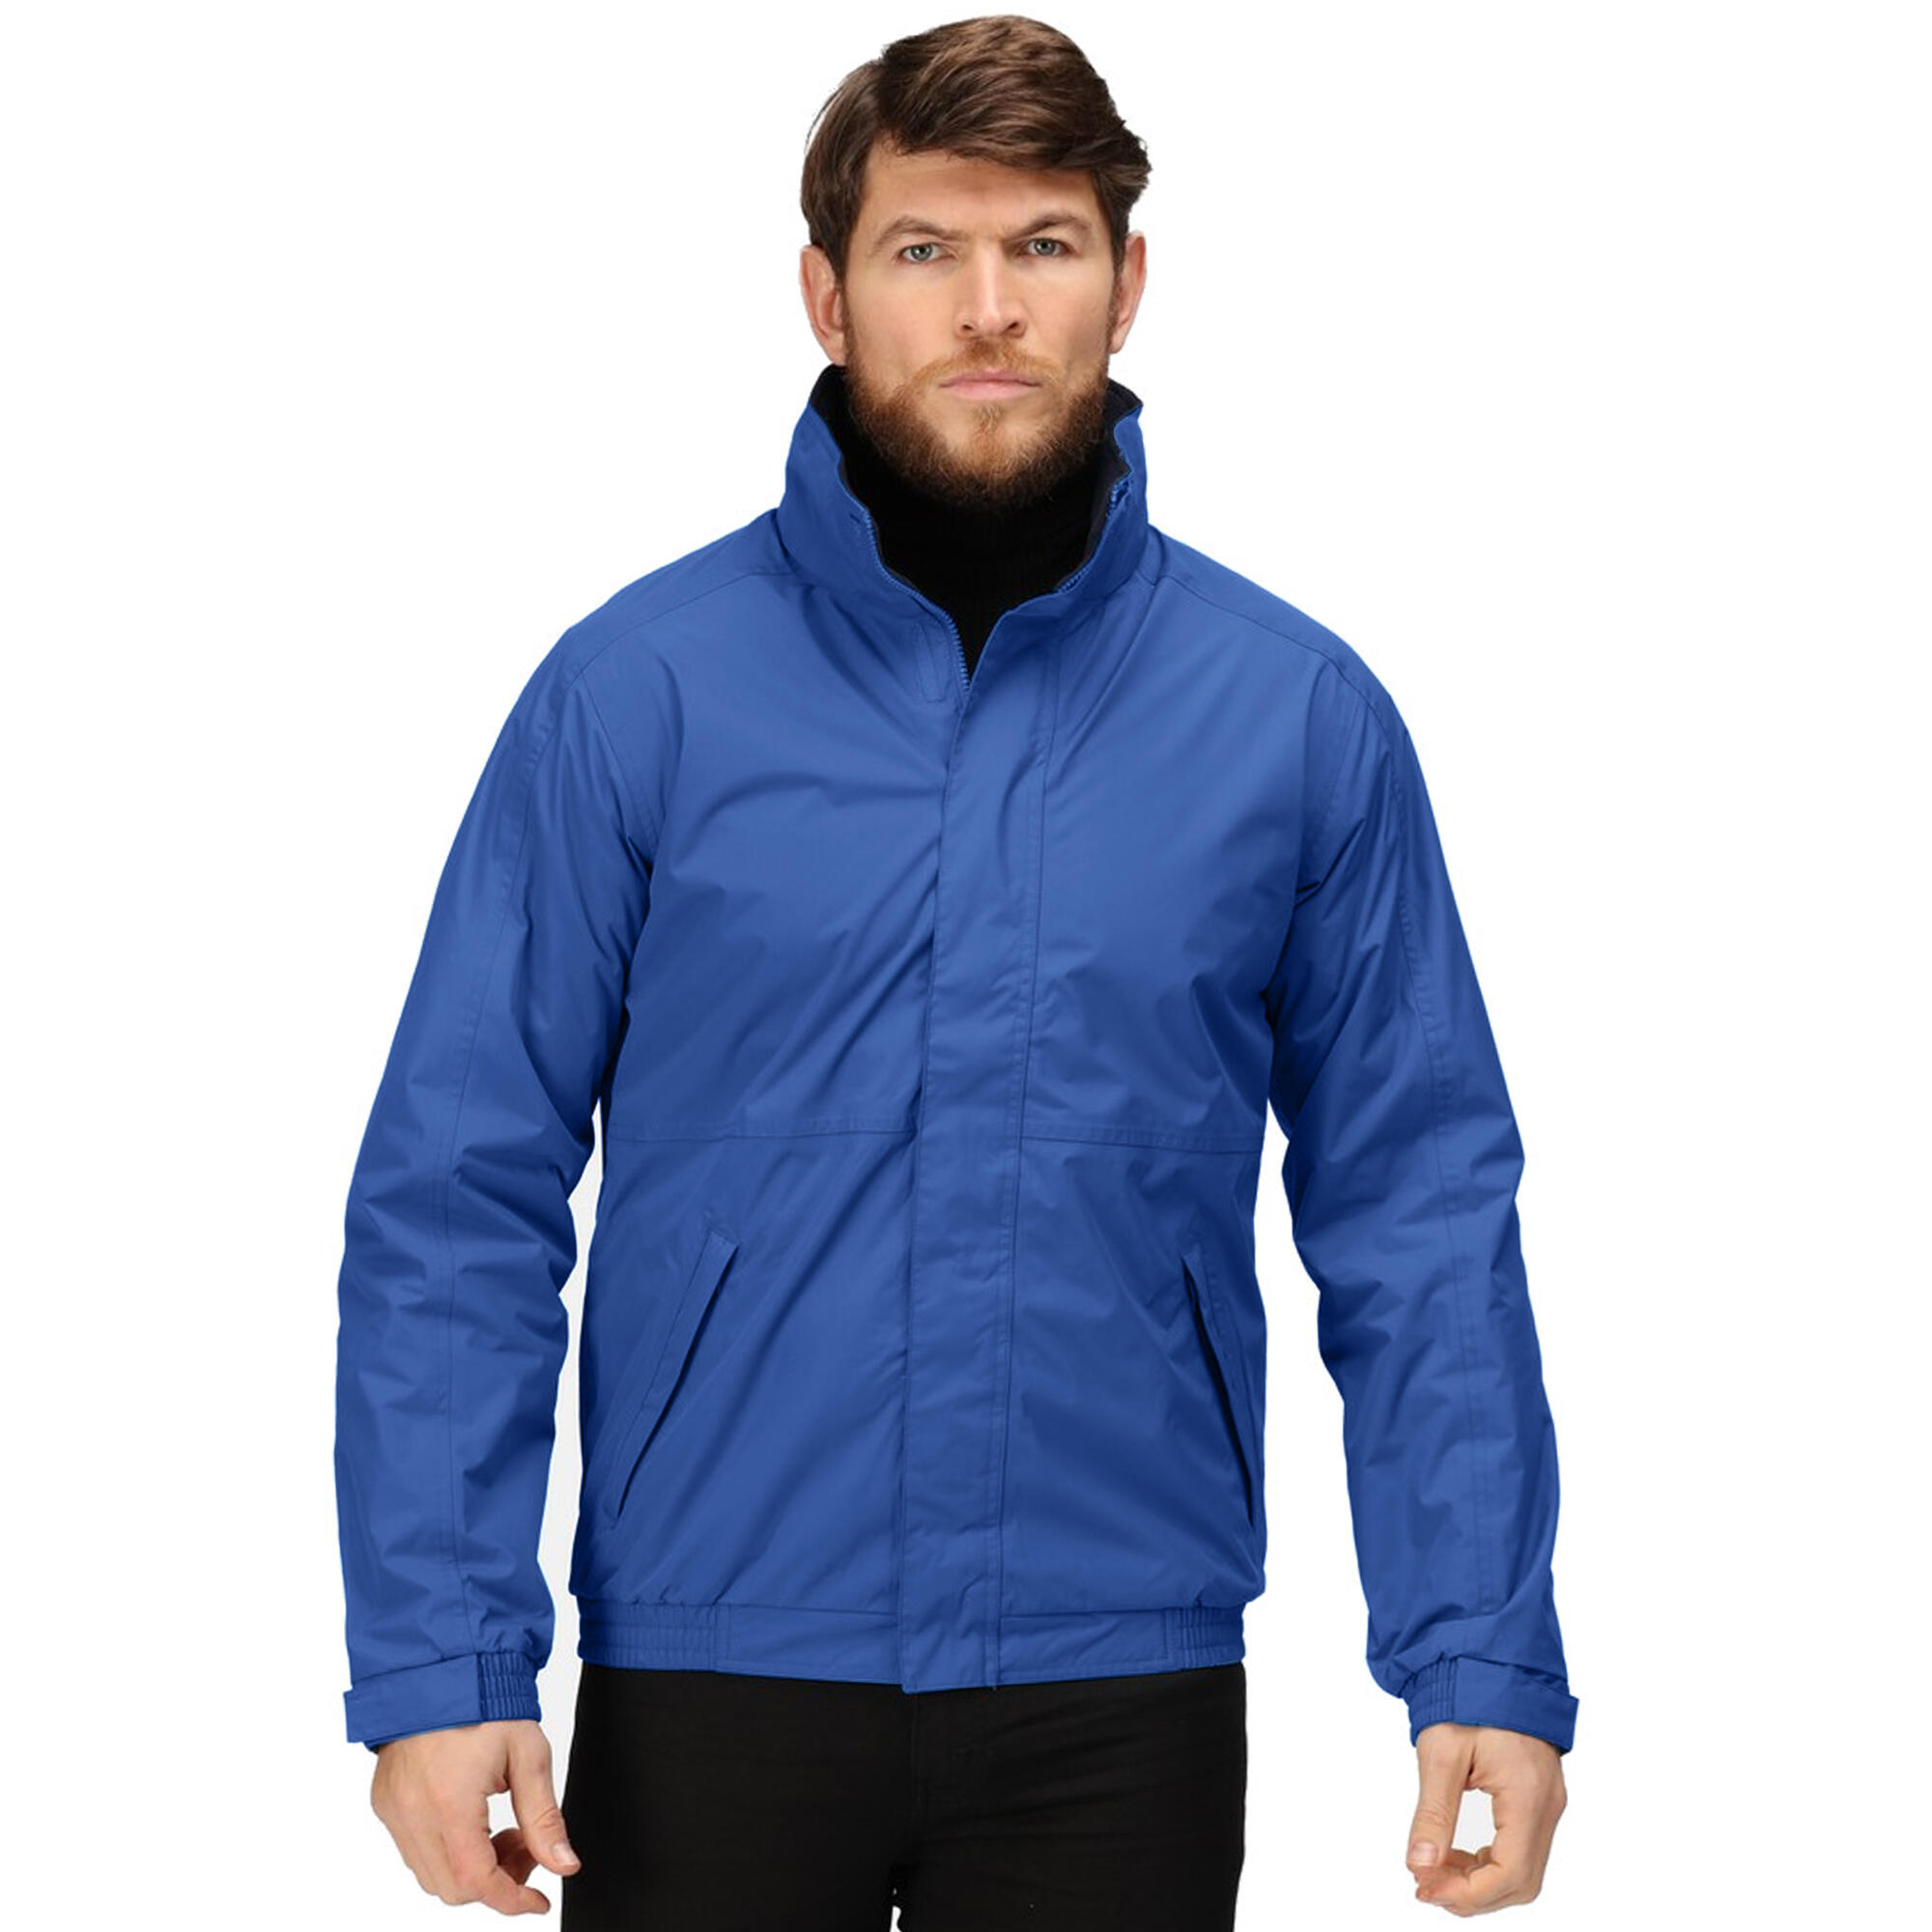 Dover Waterproof Windproof Jacket (ThermoGuard Insulation) (Royal Blue) 4/5